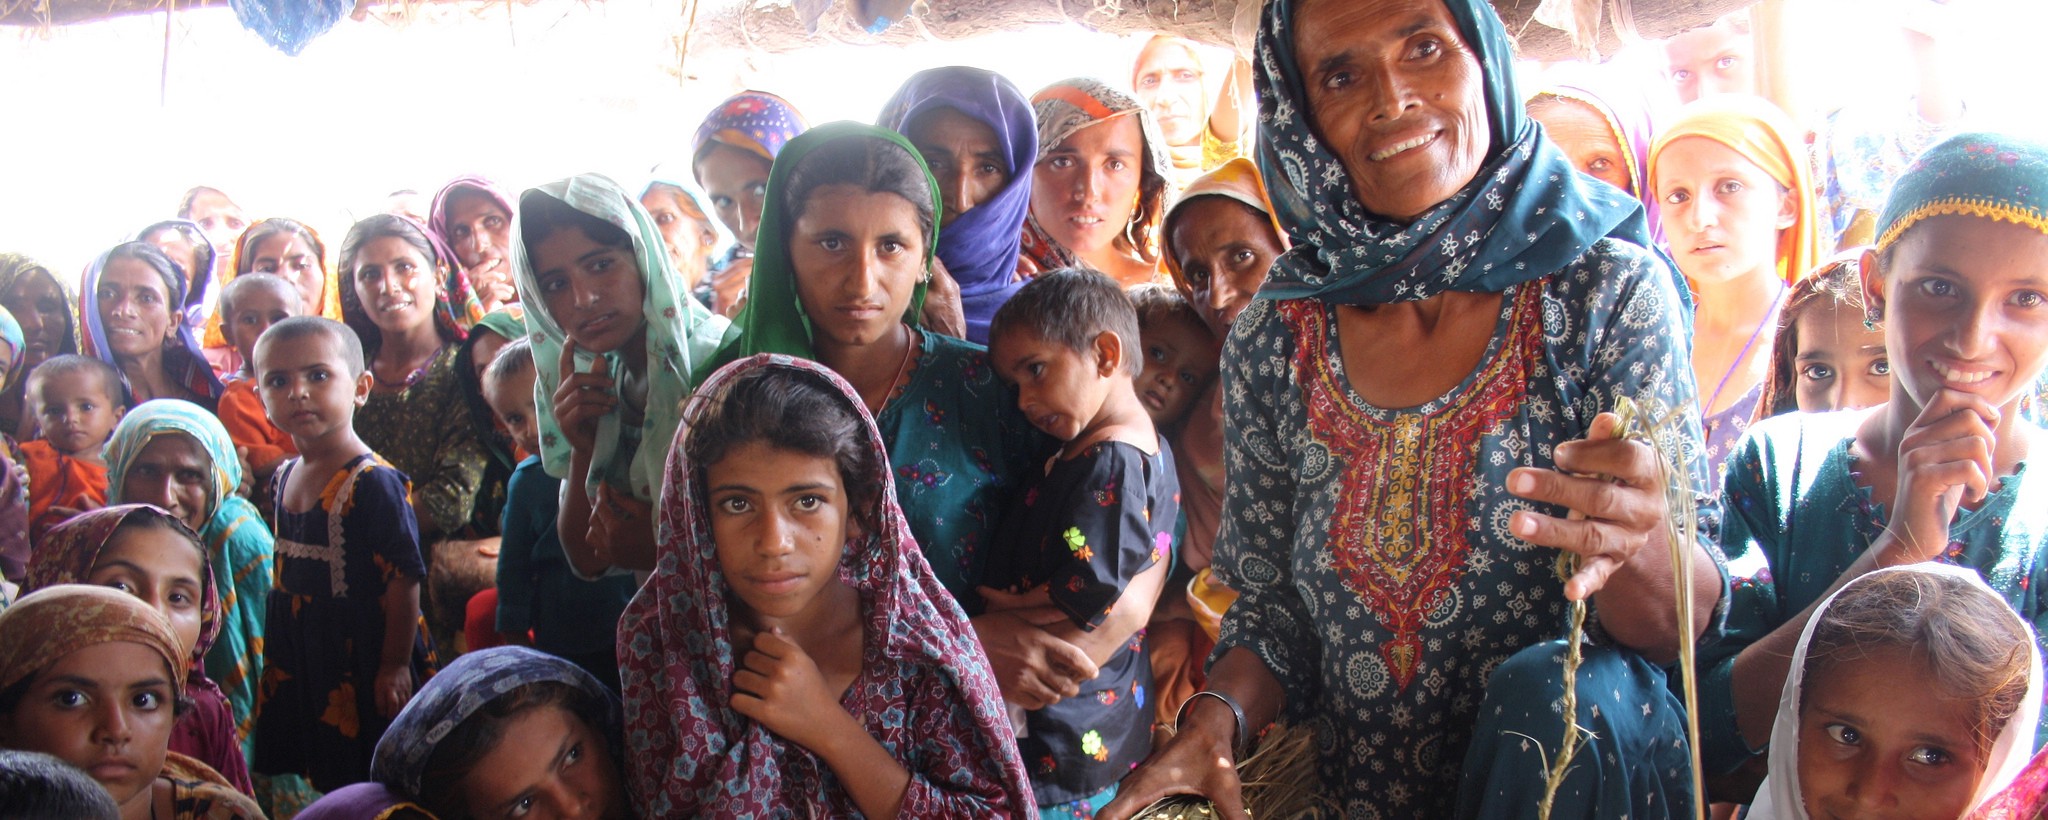 A large group of women and children in Pakistan